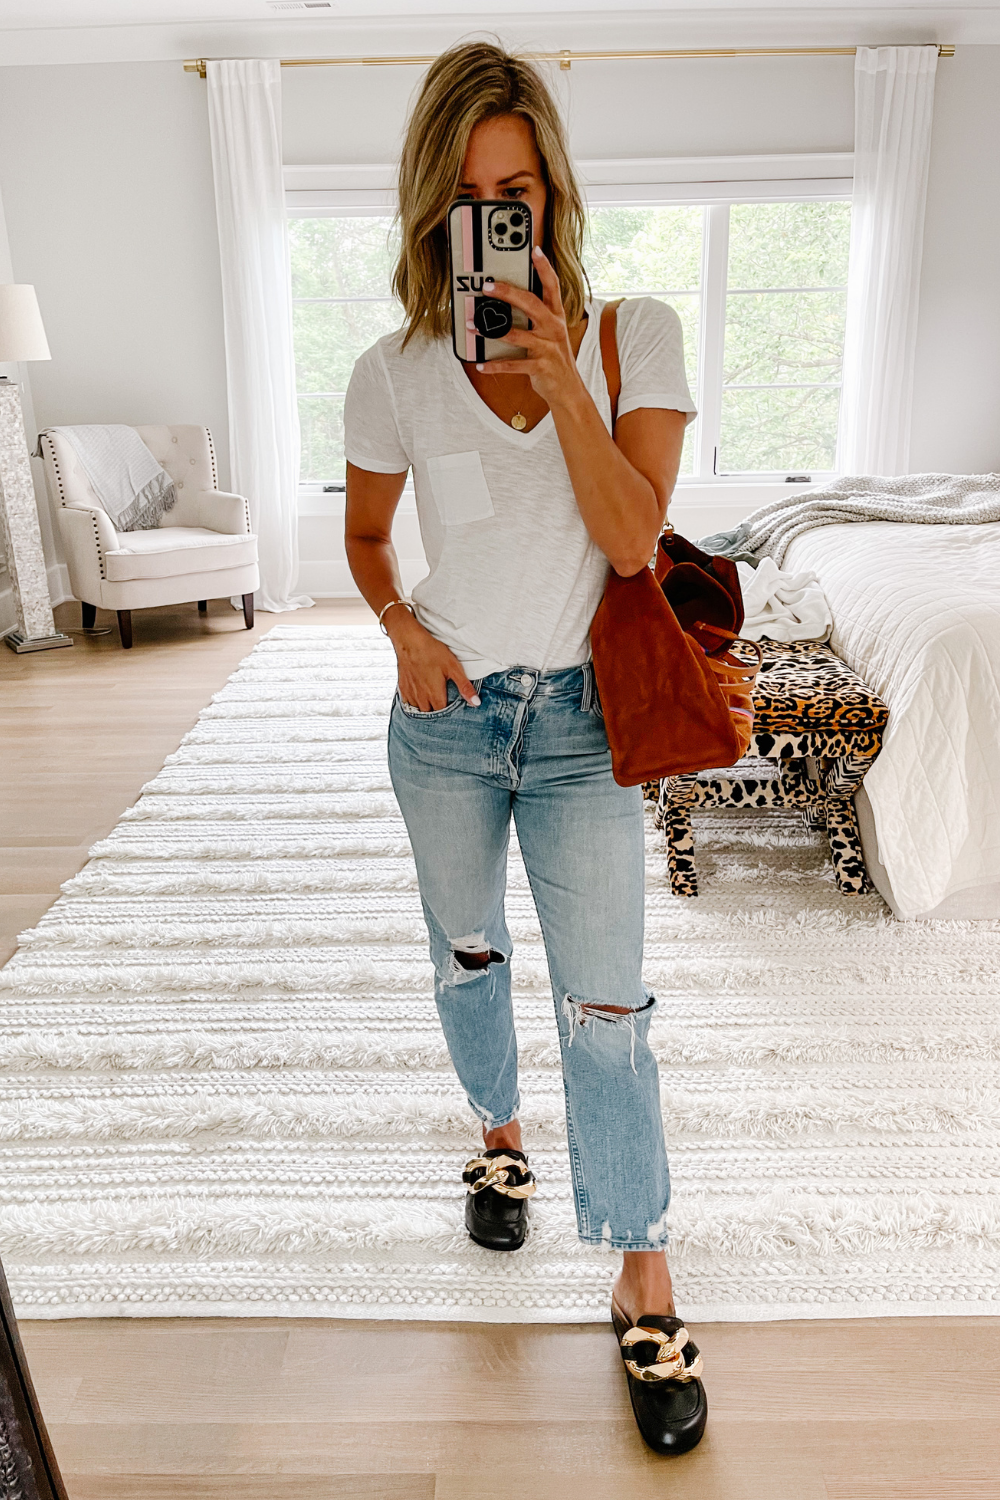 Suzanne wearing a white tee, Mother Tomcat jeans, mules, and a tote